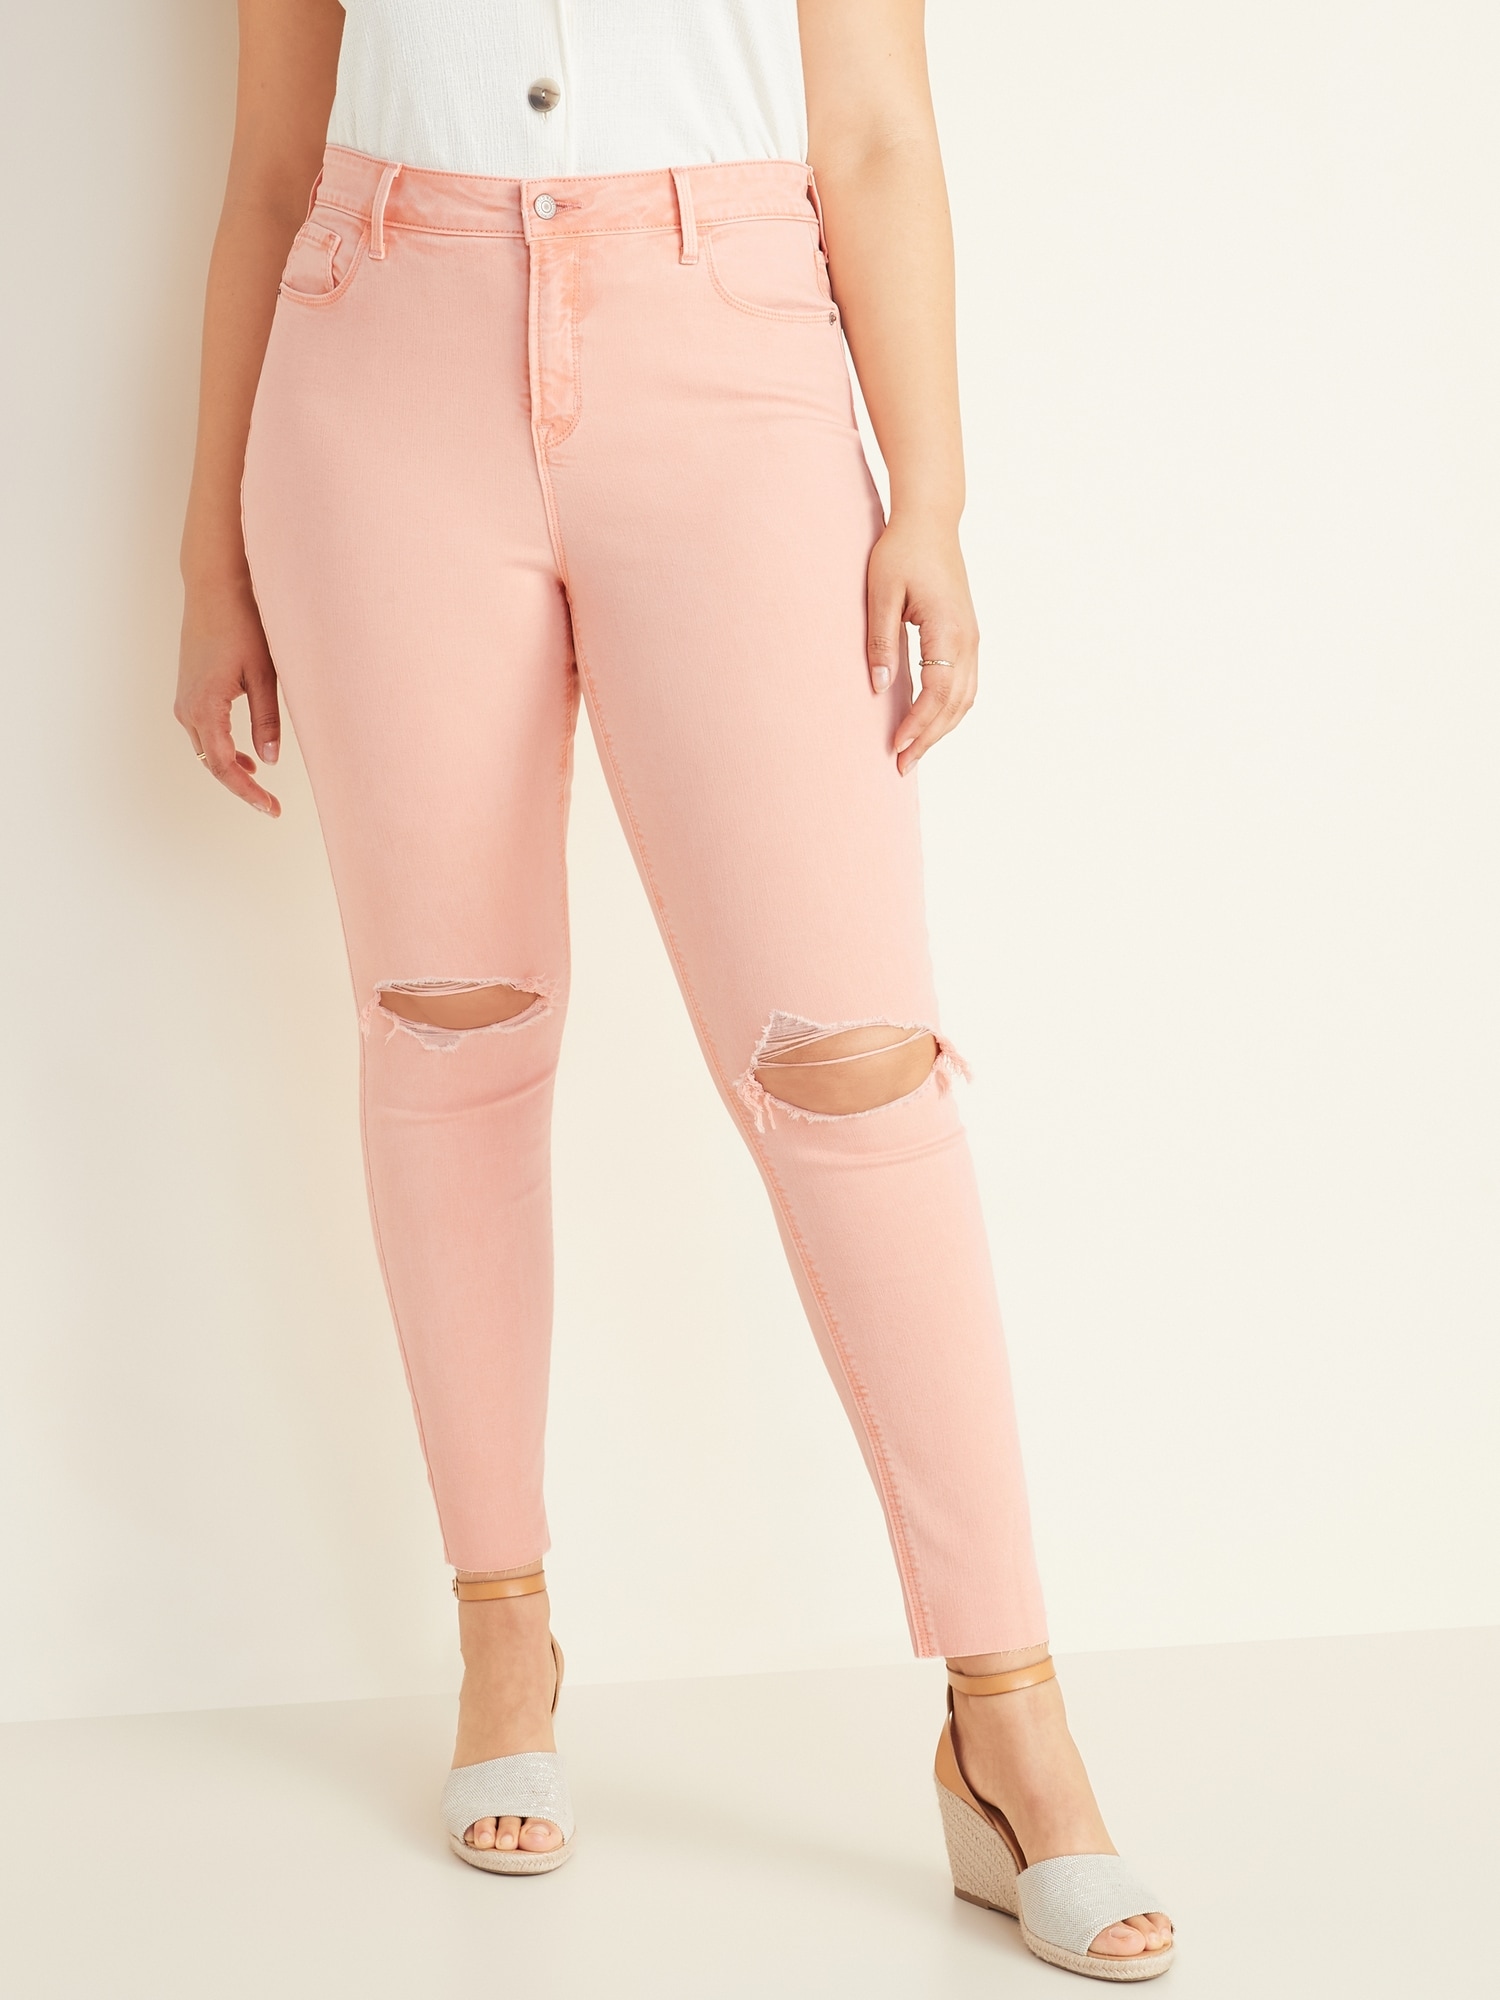 peach colored jeans for womens